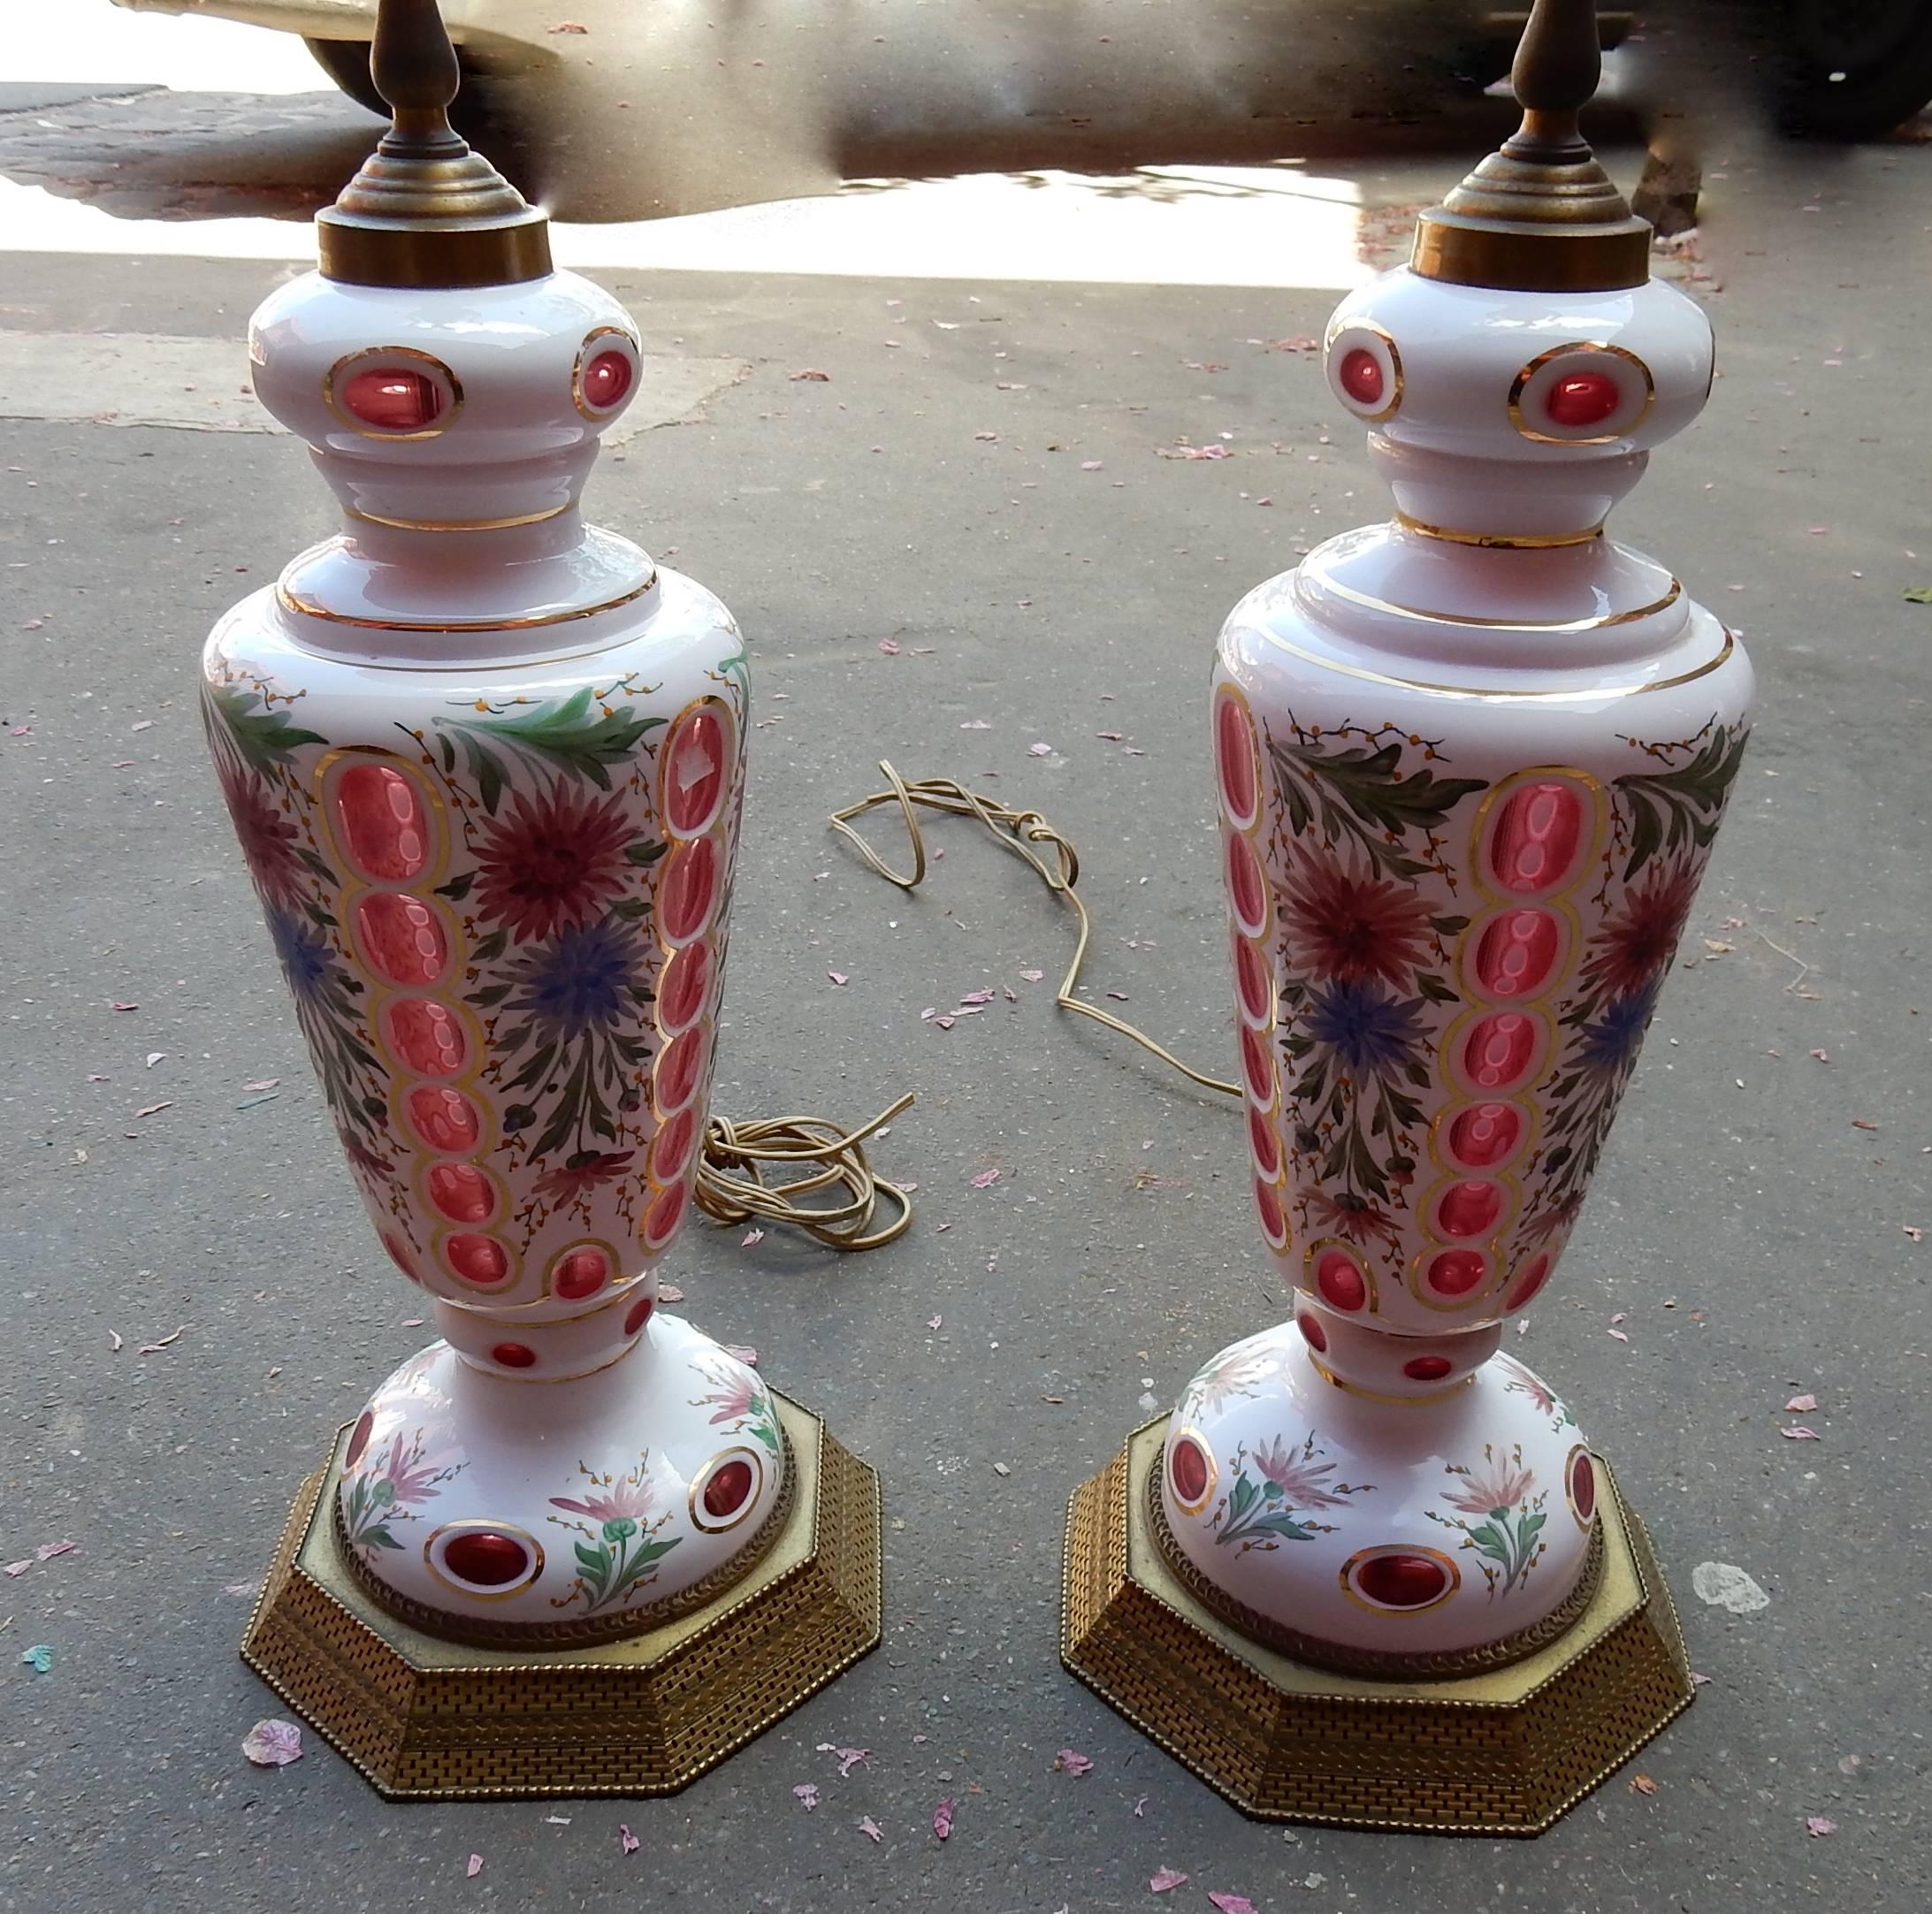 Pair of lamps decorated with flowers, openwork bronze cobs, label Made in West Germany, label deposited from 1890.
The vases alone are 41 cm high, oval windows or we can see the color purple in the middle of the white milky decor made with Spath